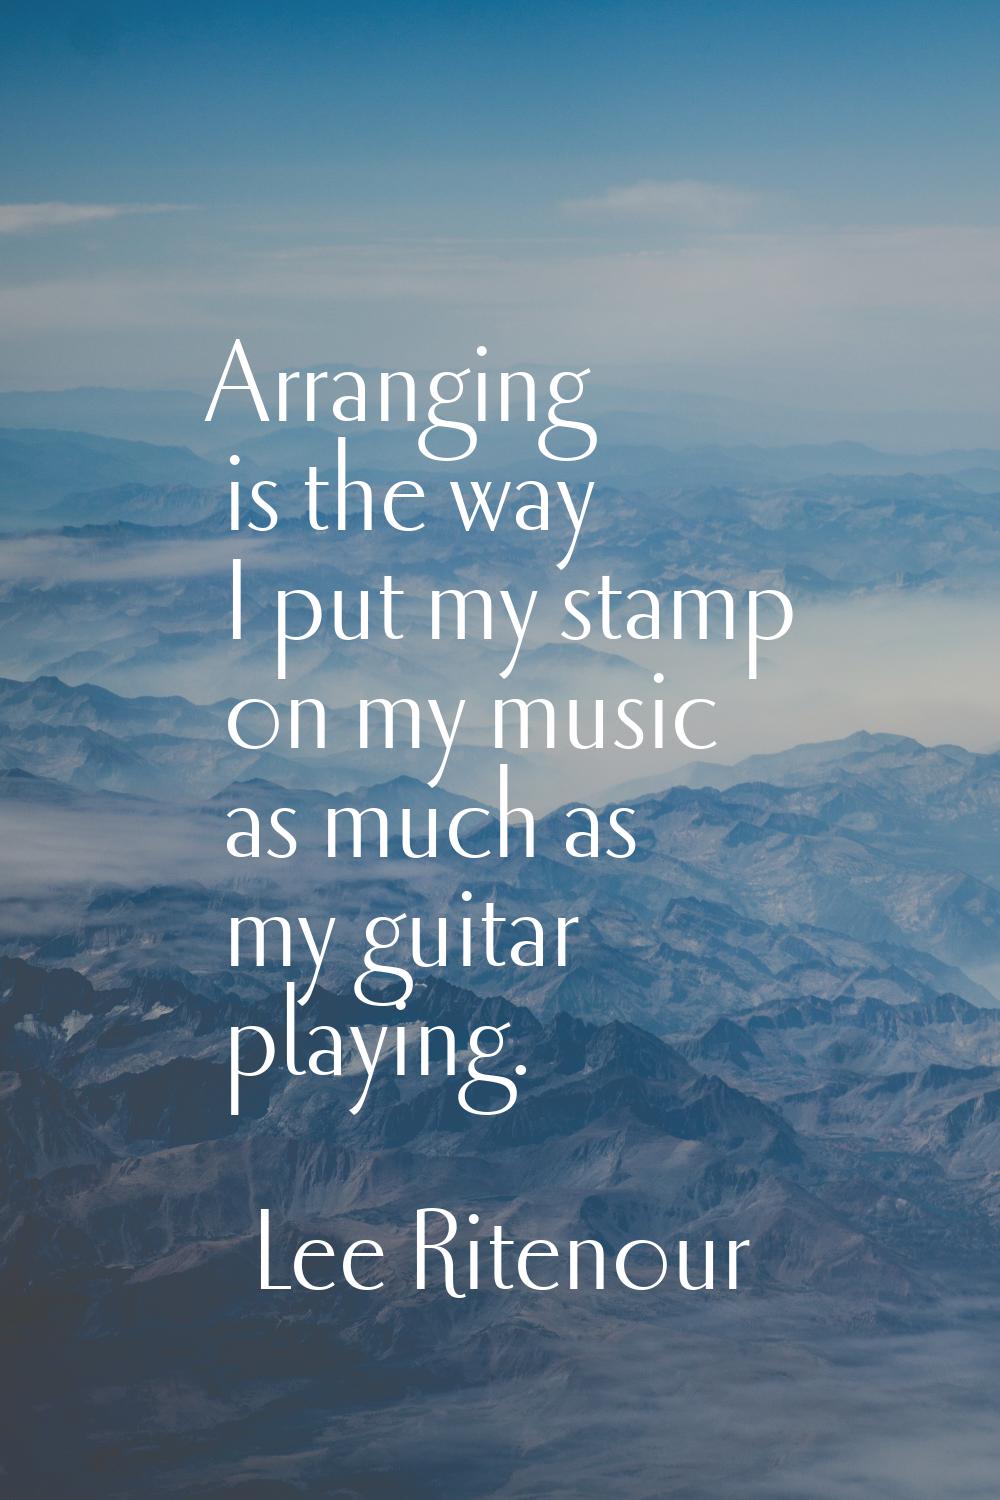 Arranging is the way I put my stamp on my music as much as my guitar playing.